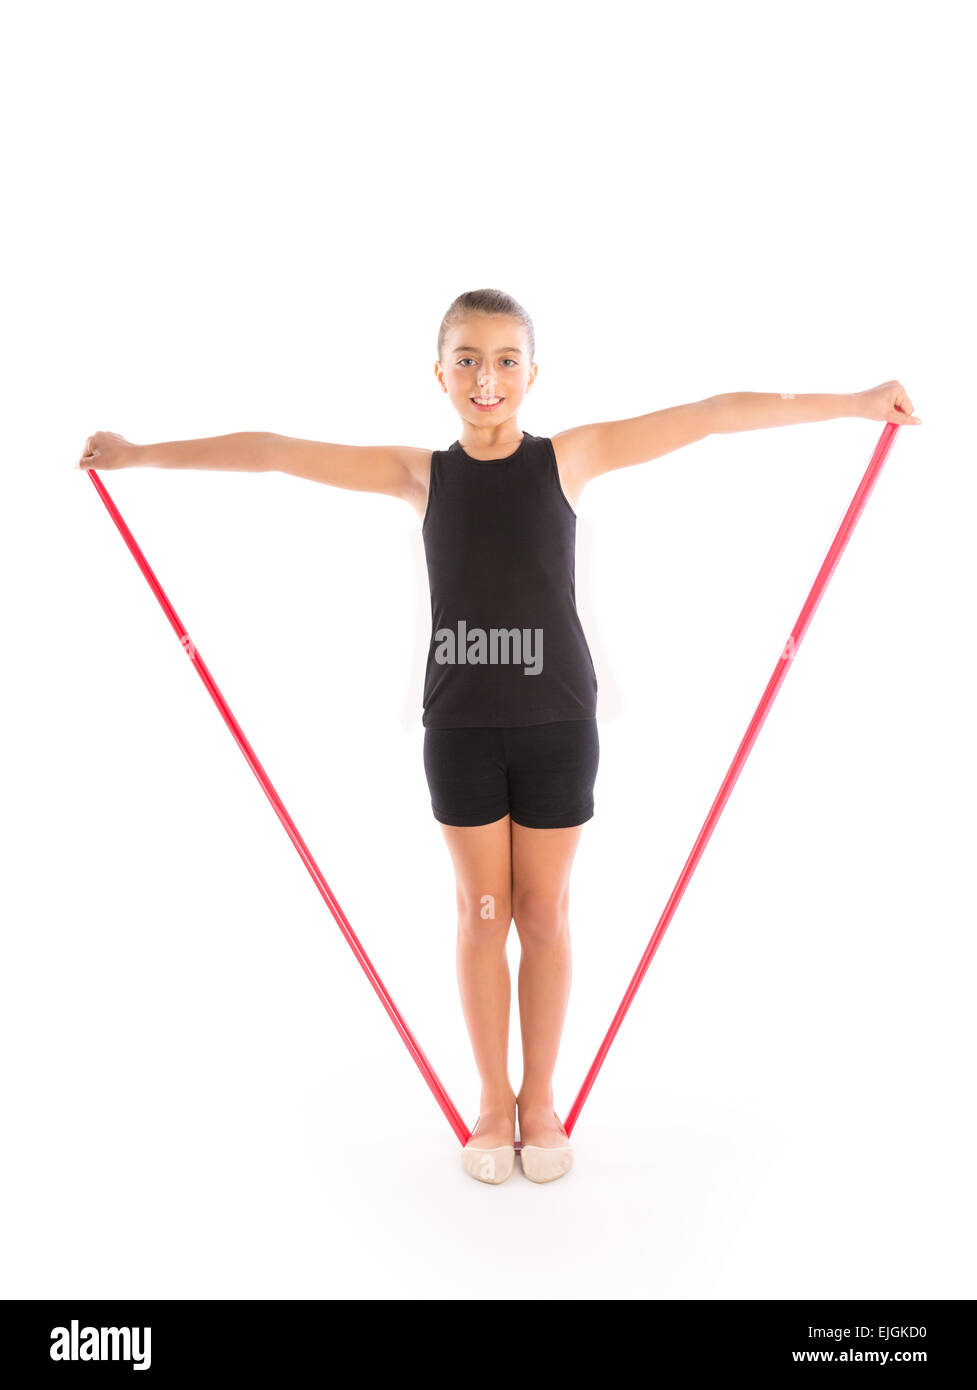 Fitness rubber resistance band kid girl exercise workout on white background Stock Photo